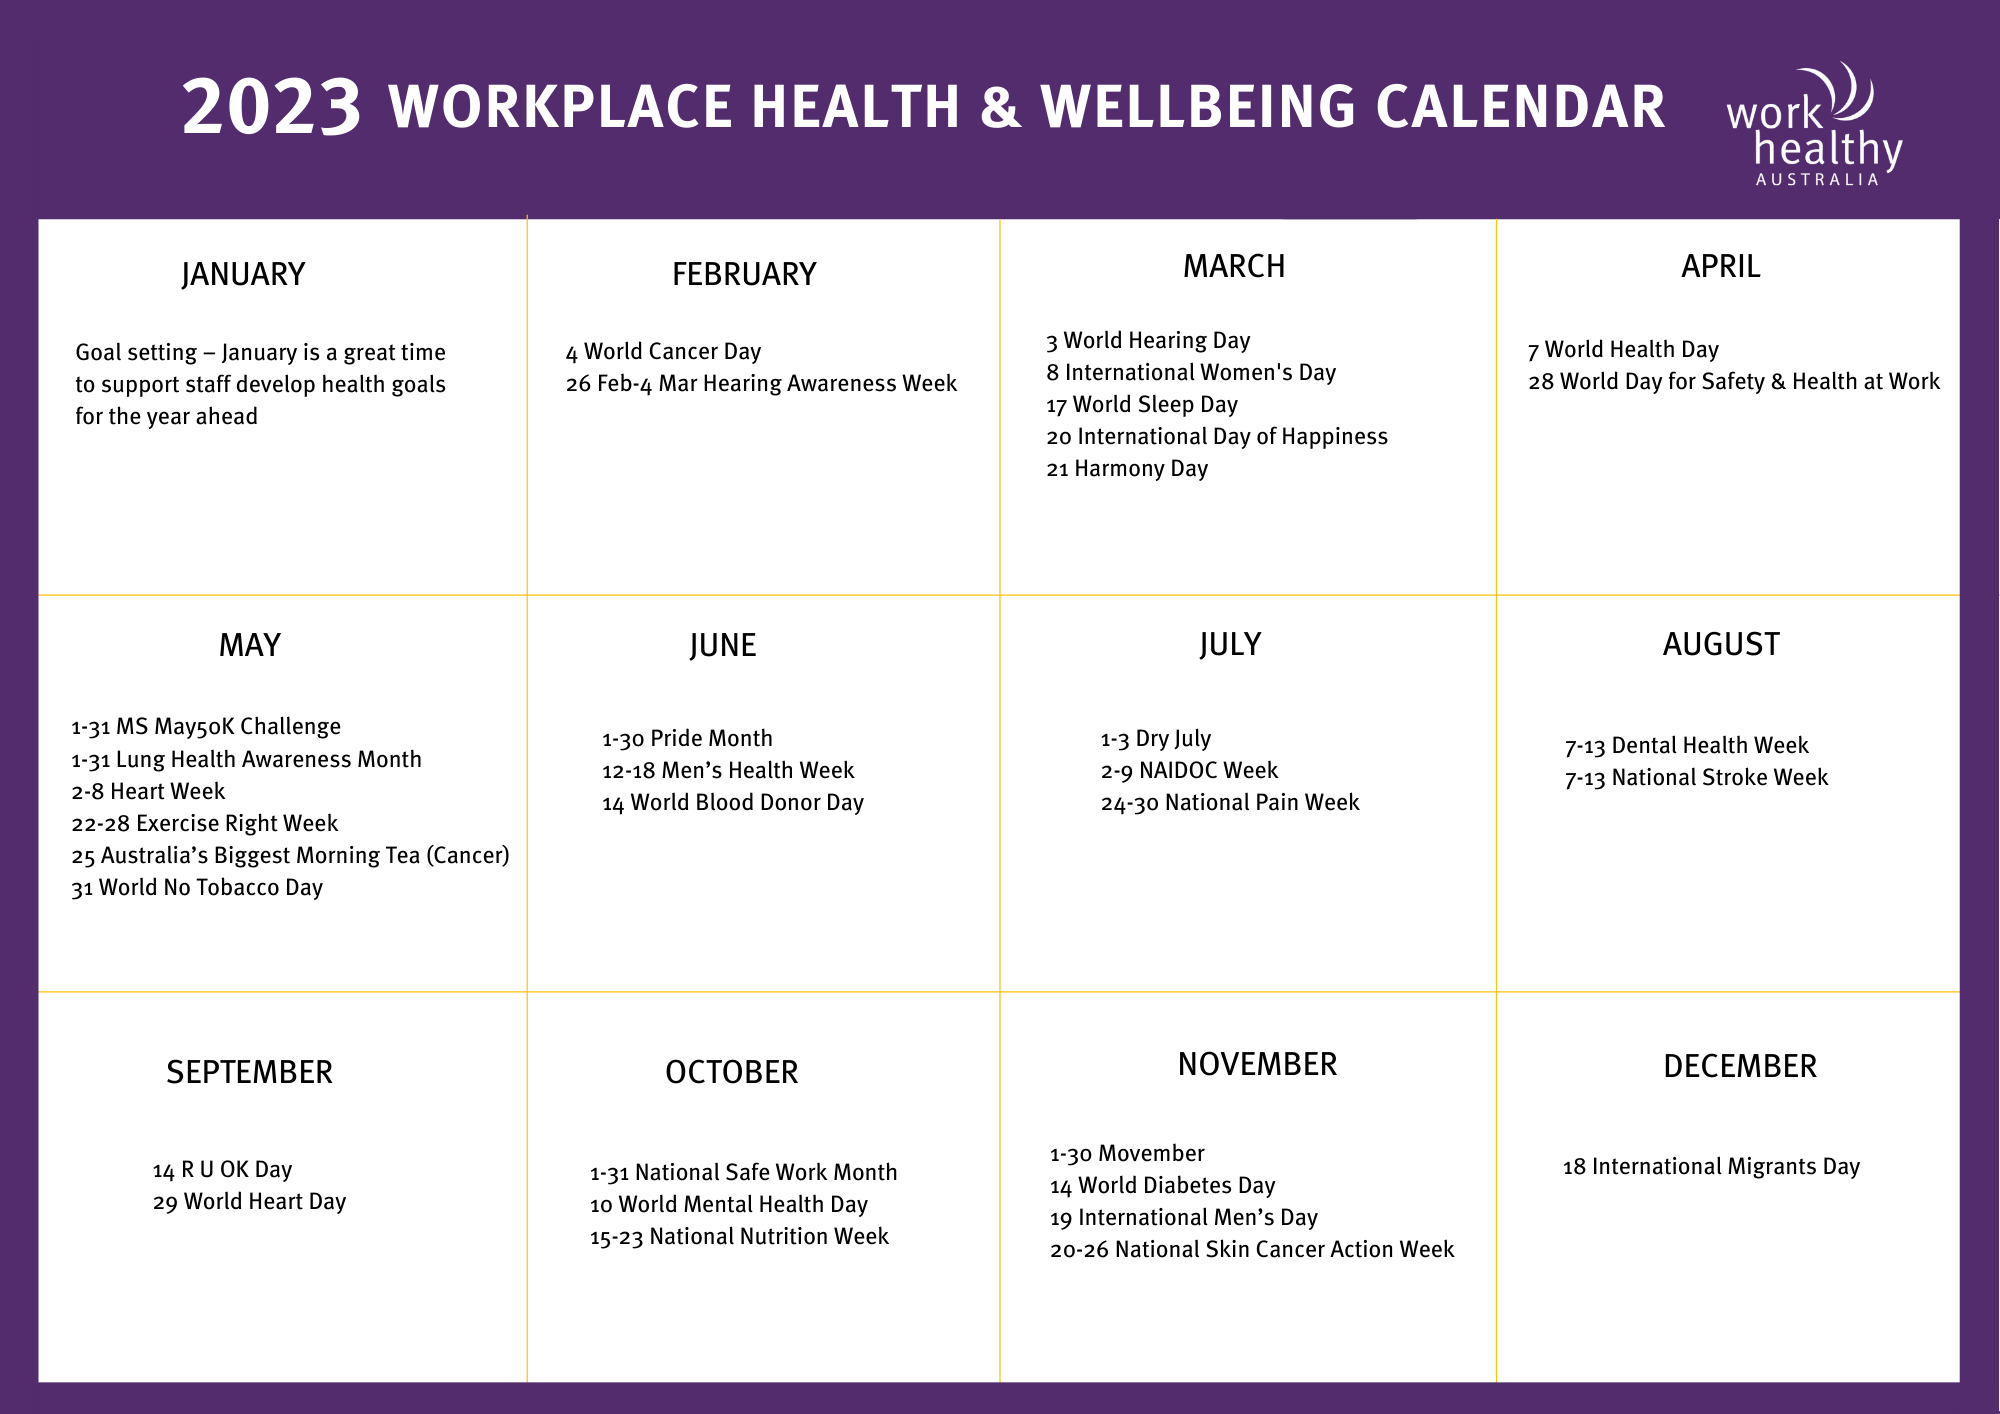 10-tips-to-promote-workplace-health-and-wellbeing-events